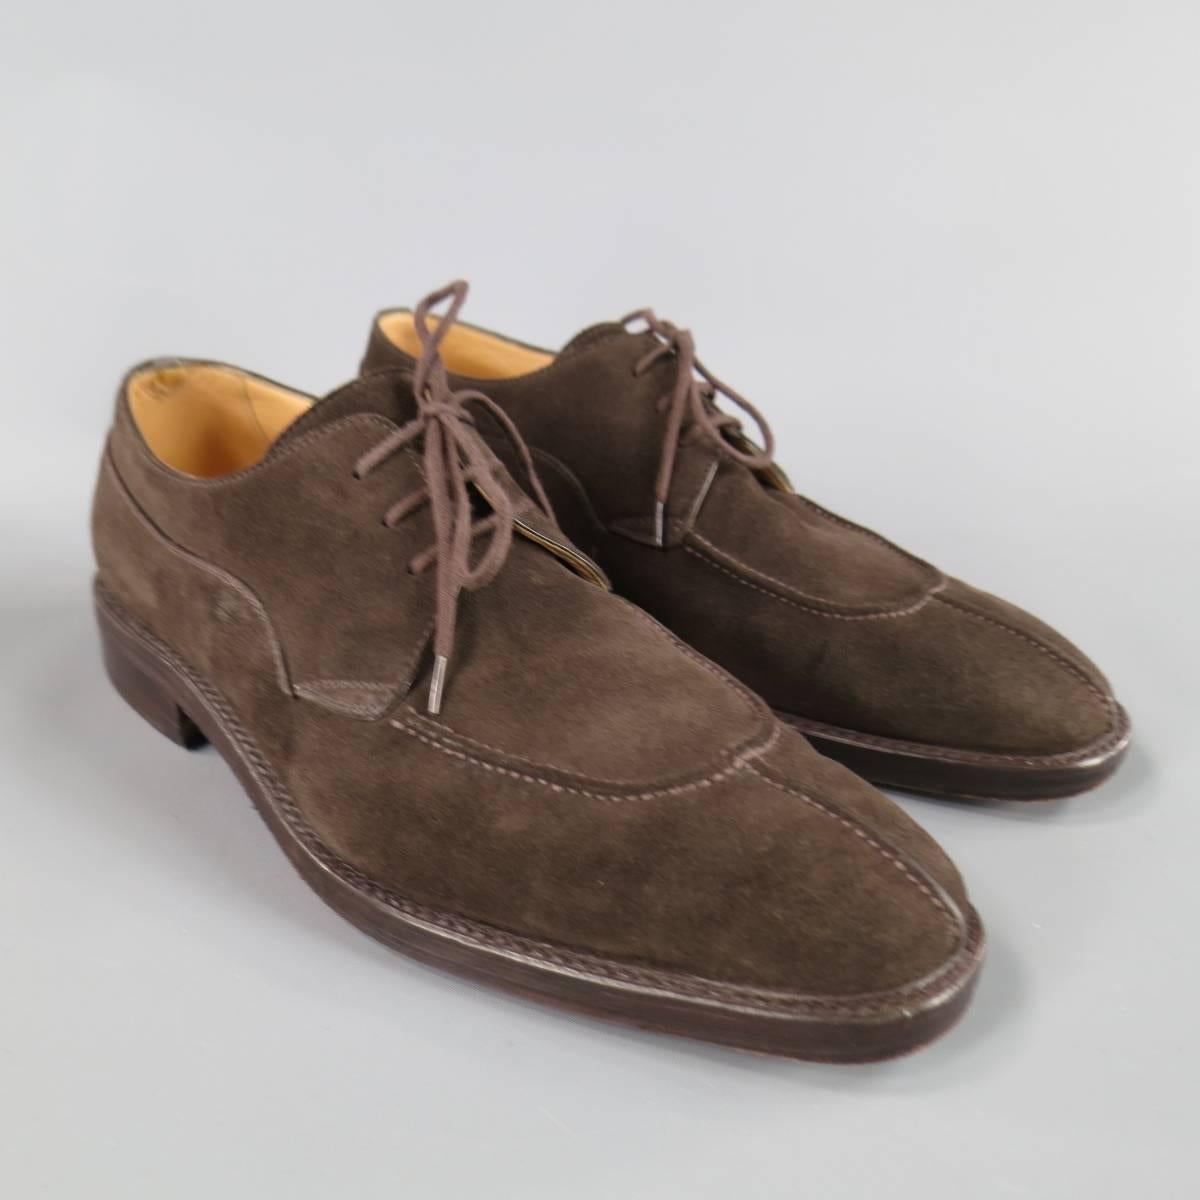 GRAVATI by WILKES BASHFORD Lace-Up Shoes consists of suede material in a brown color tone. Designed with a toe seam front, top stitching and same tone laces. Detailed brown leather heel with rubber grip sole. Made in Italy.
 
Excellent Pre-Owned